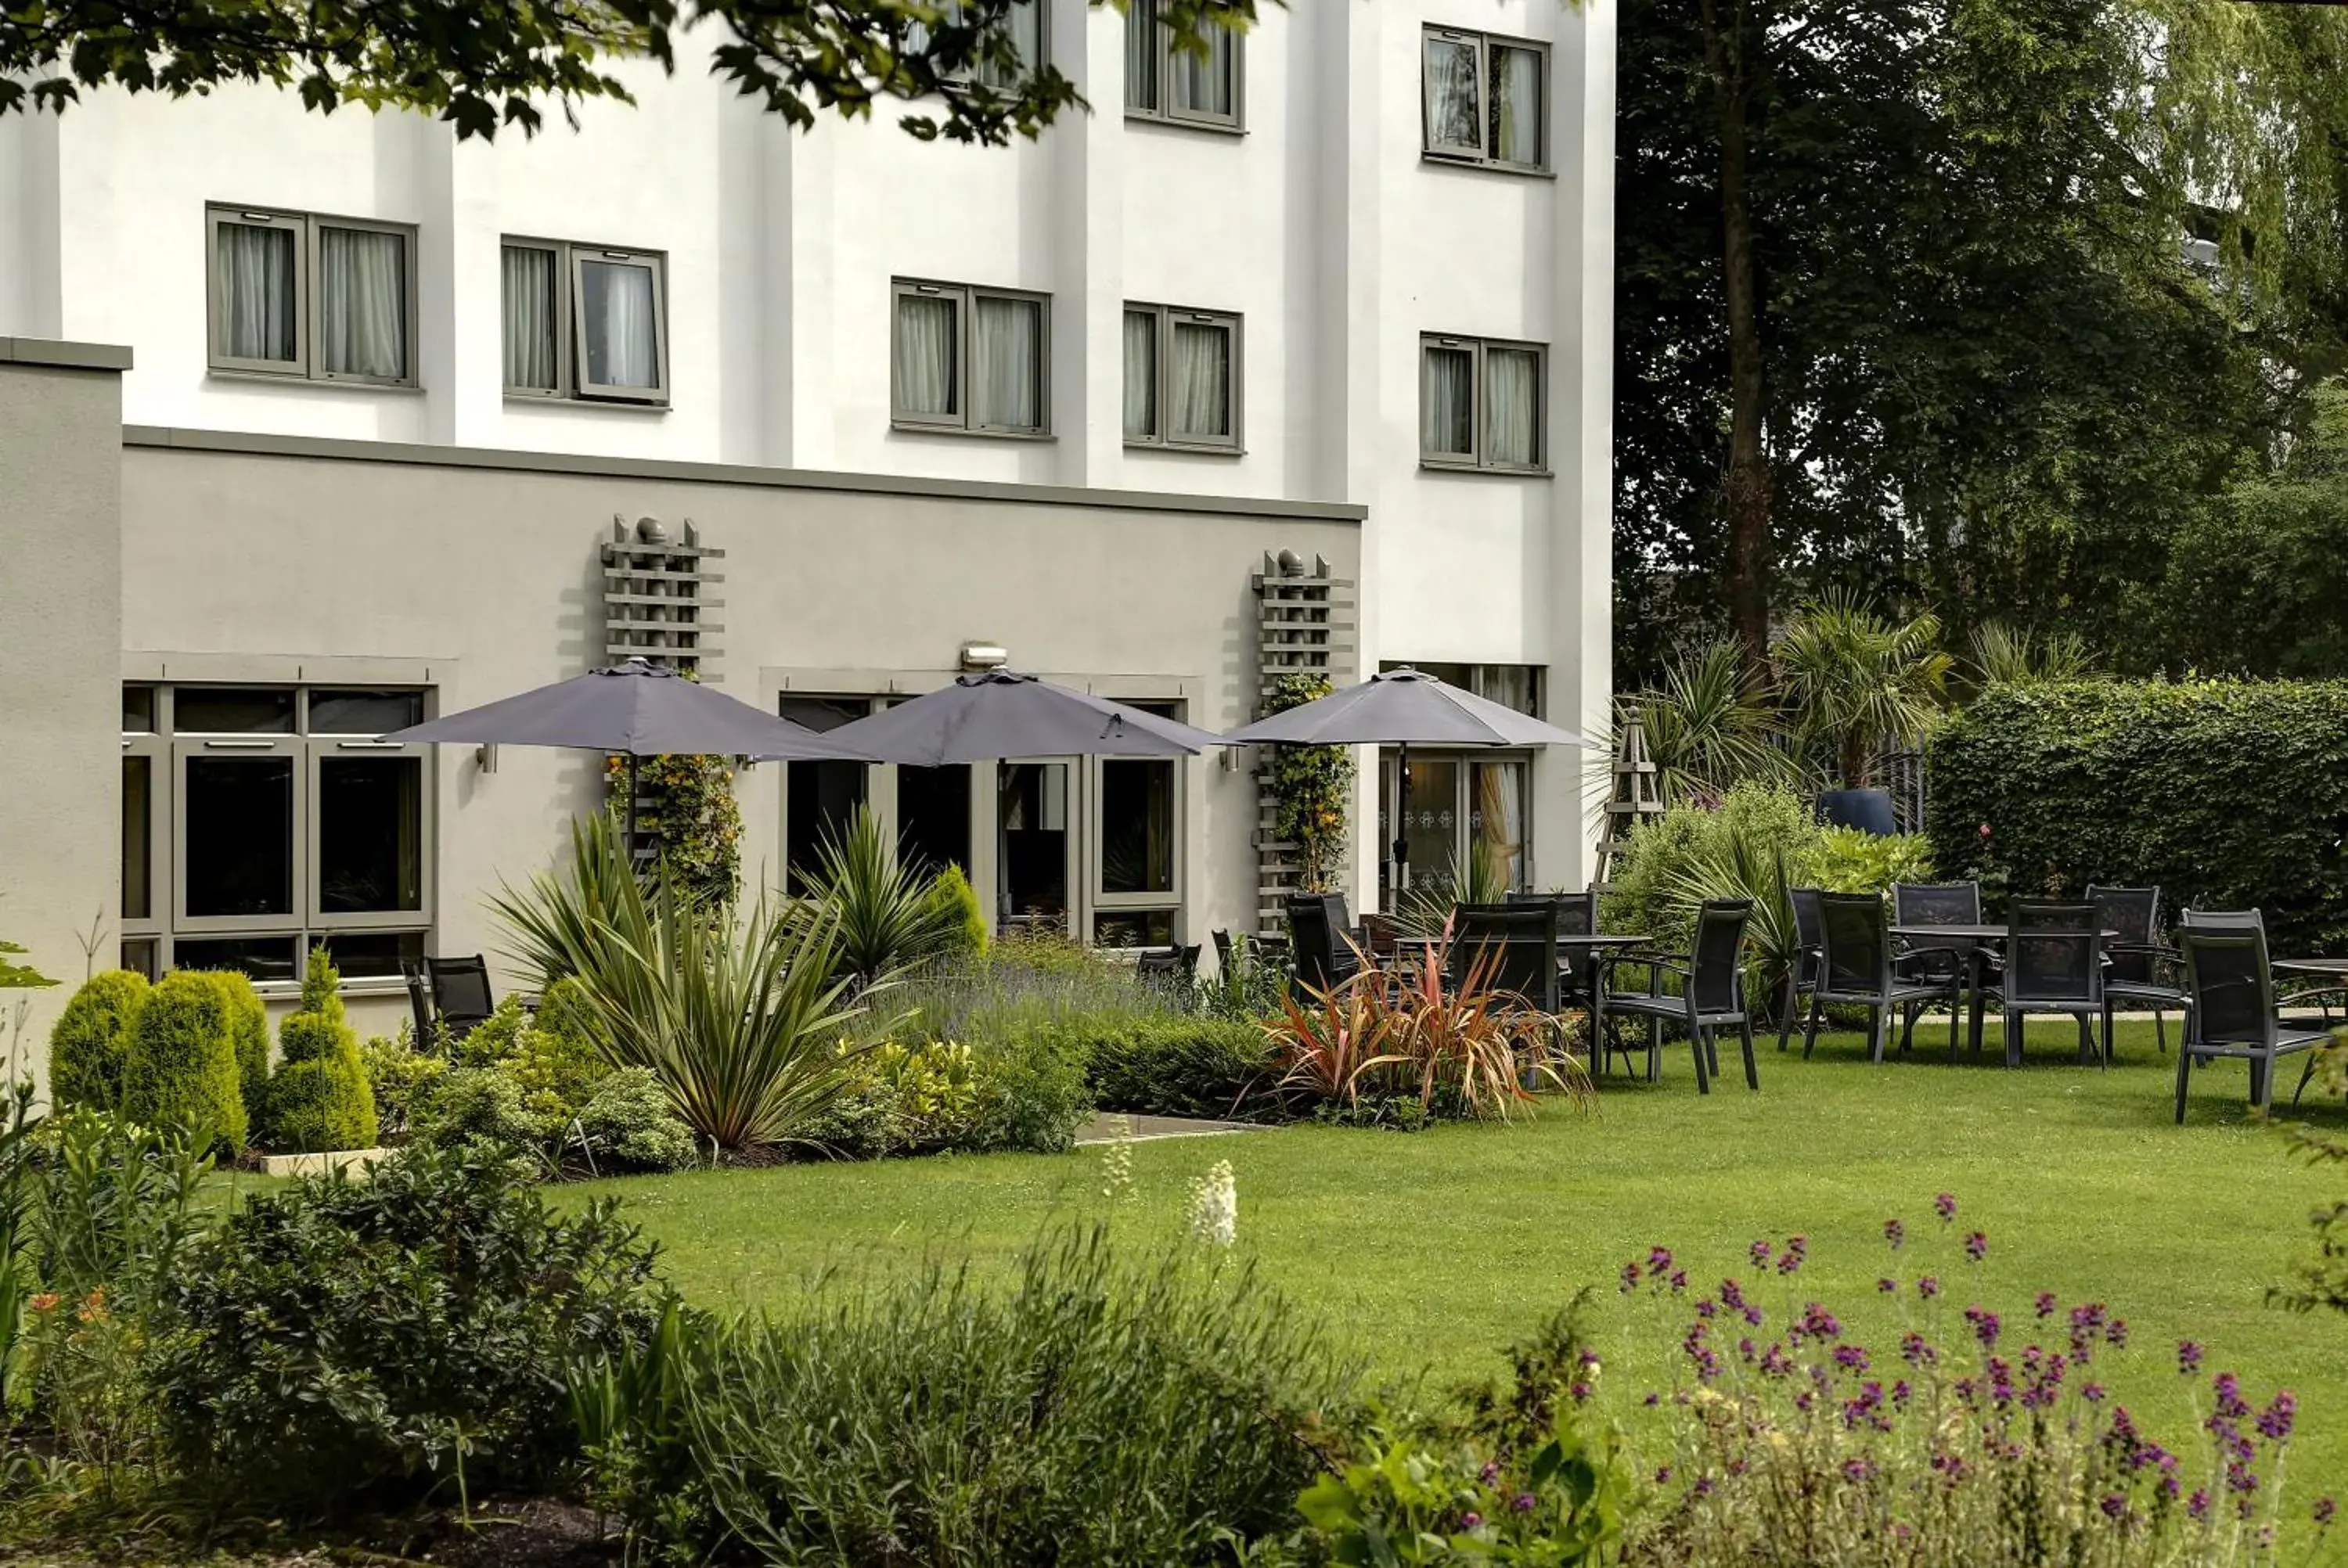 Property Building in Best Western Plus Pinewood Manchester Airport-Wilmslow Hotel